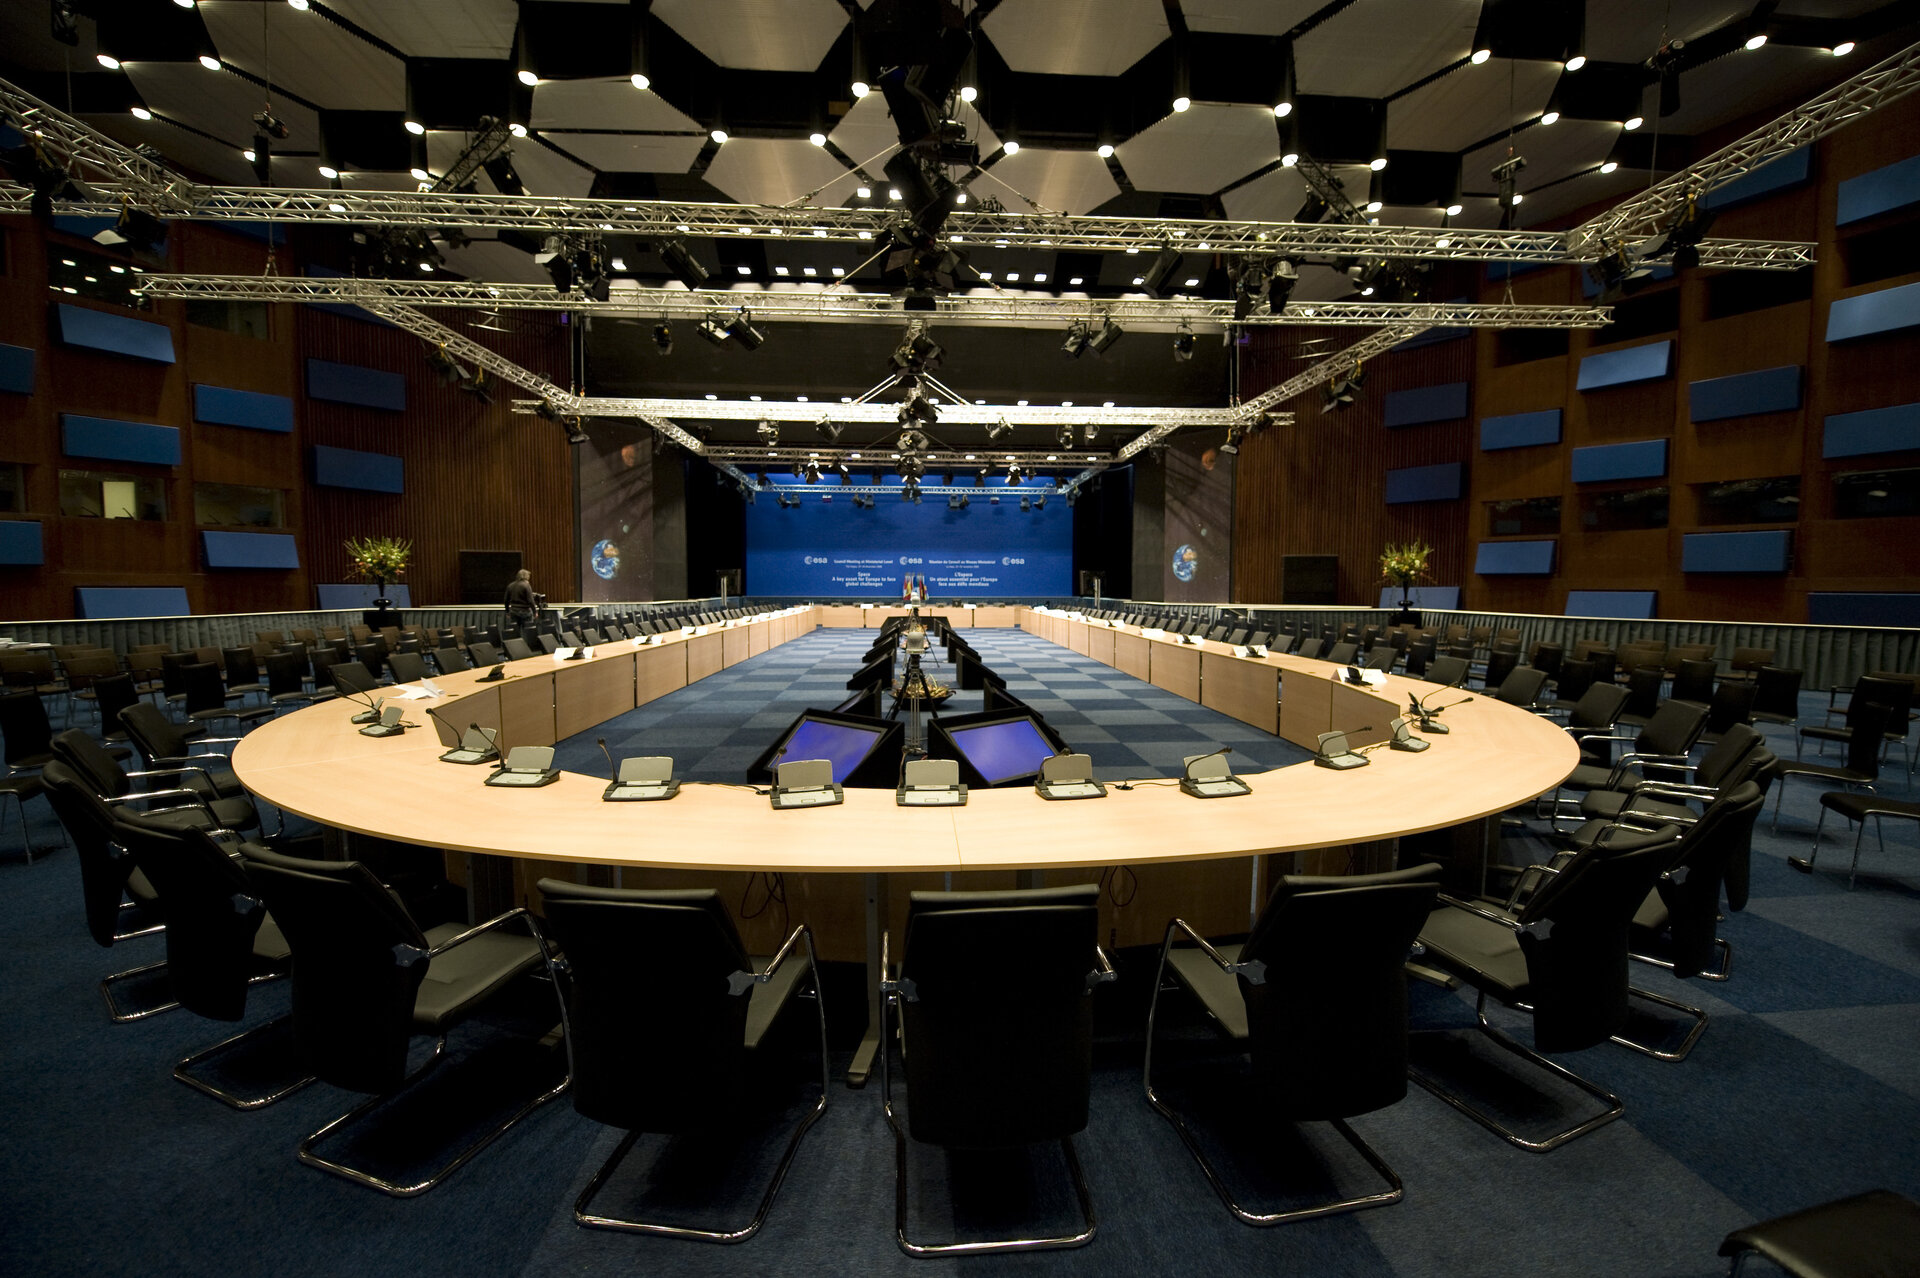 Main conference room in the World Forum Convention Centre